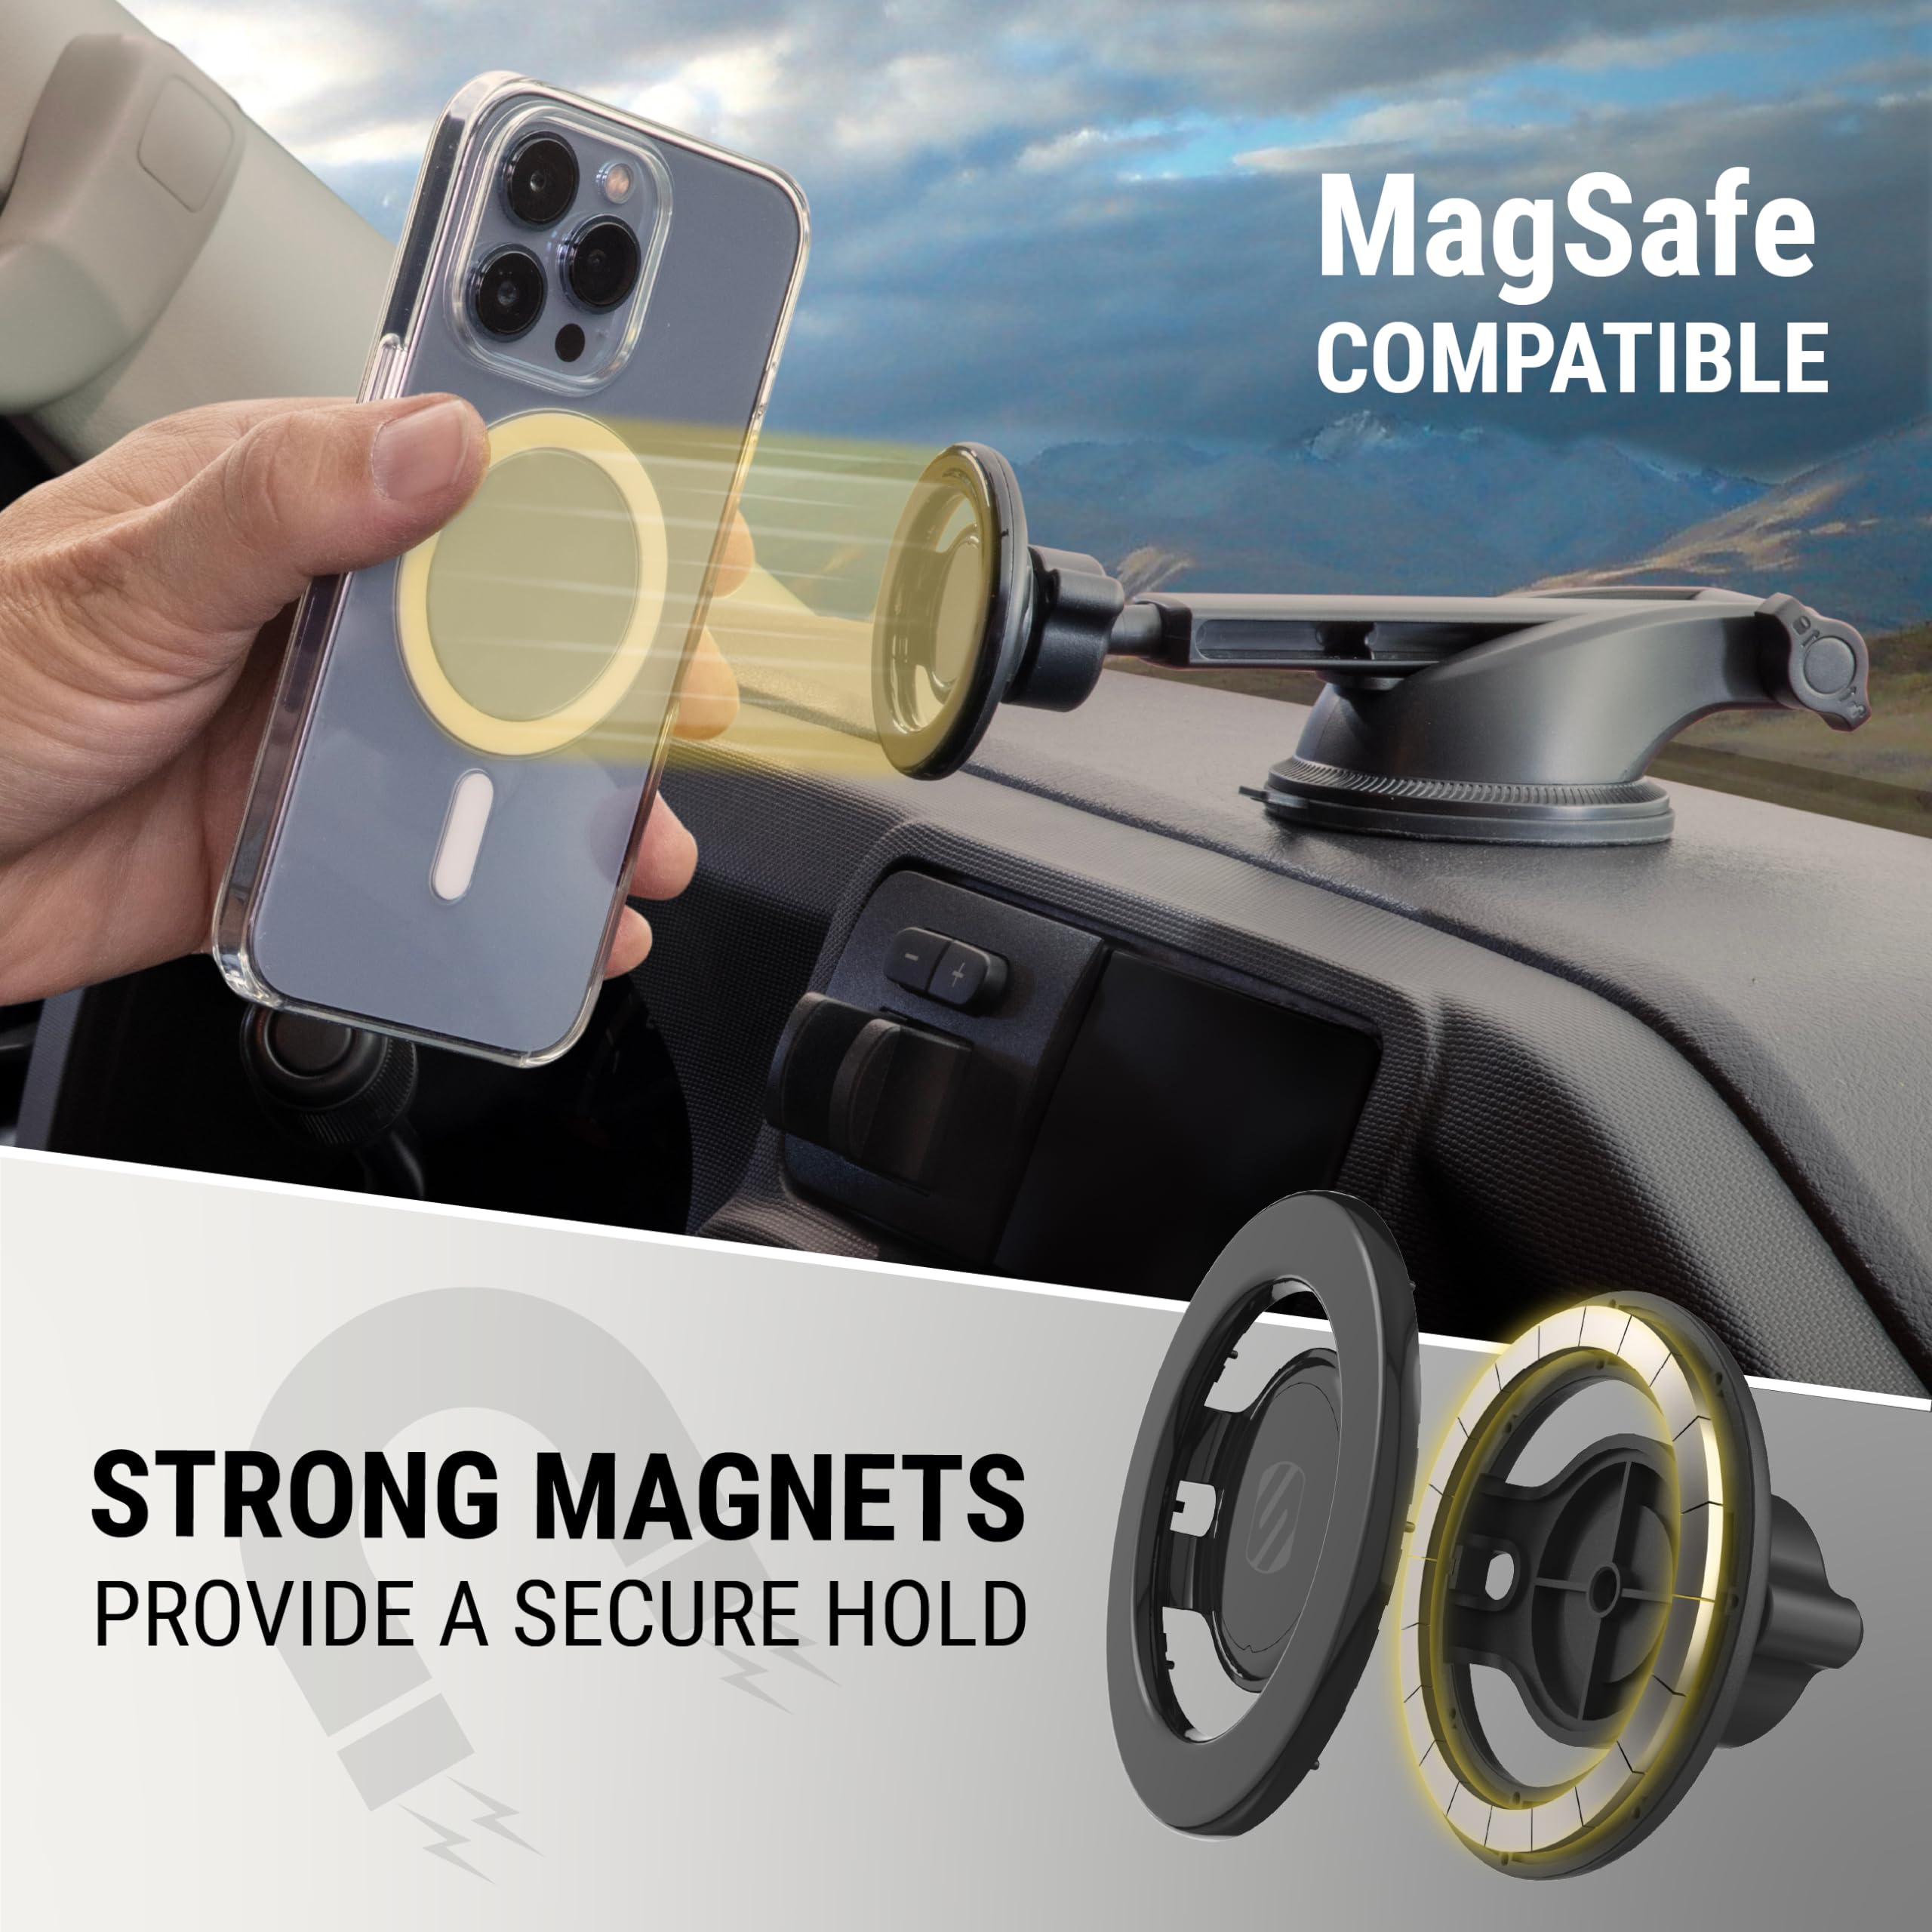 Scosche MagicMount SMSWDEX MagSafe Car Mount, Magnetic Phone Holder for Car Windshield/Dashboard, Suction Cup Phone Mount Compatible w/iPhone 15/14/13/12/Pro/Max/Plus/Mini/Mag Safe Accessories